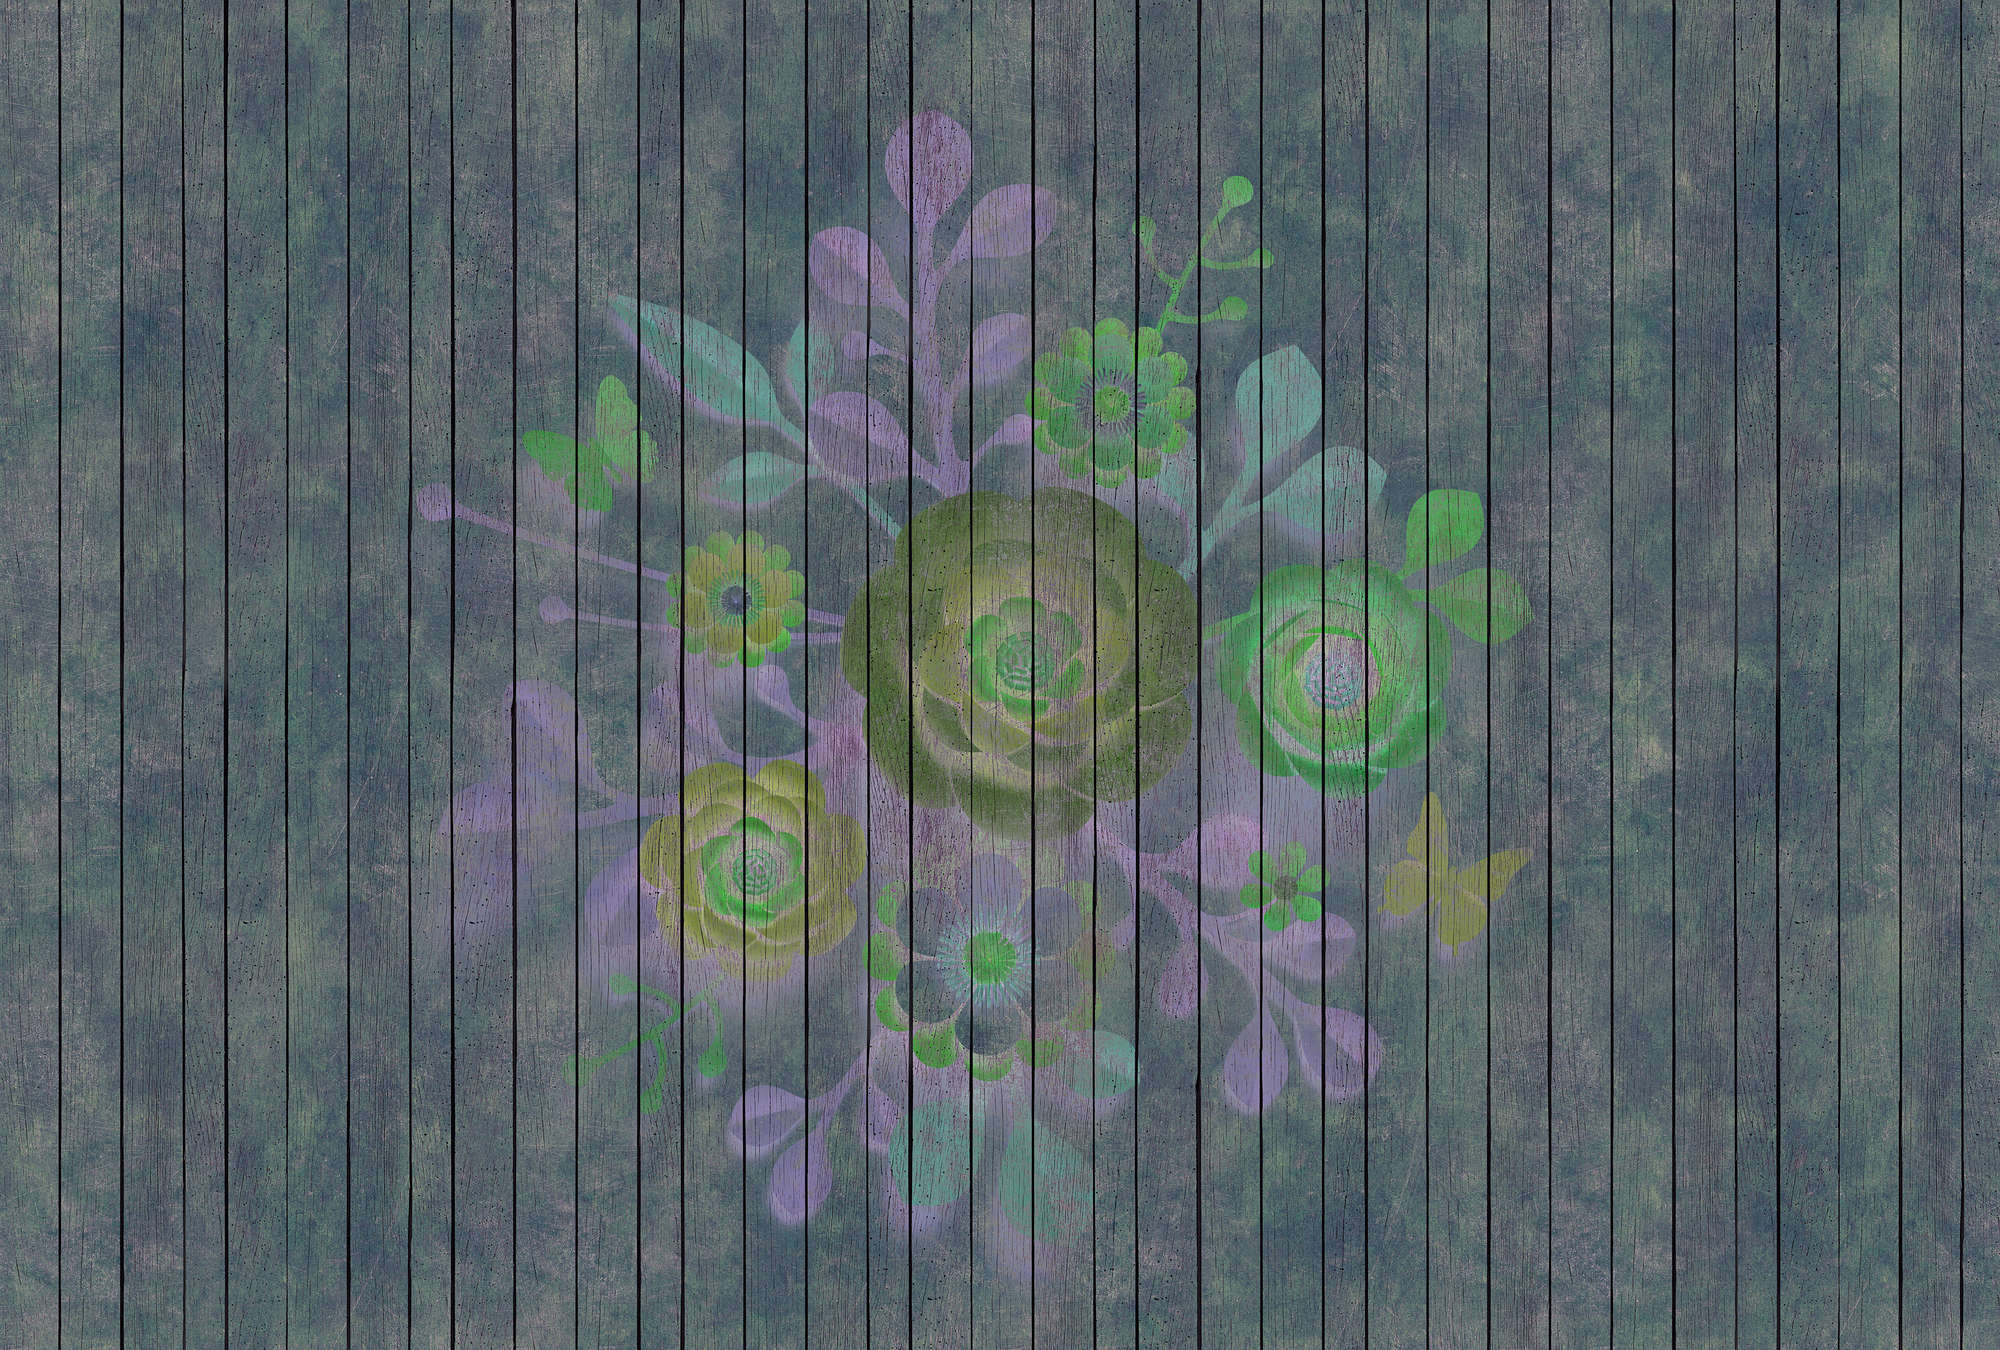             Spray bouquet 2 - Photo wallpaper in wood panel structure with flowers on board wall - Blue, Green | Premium smooth fleece
        